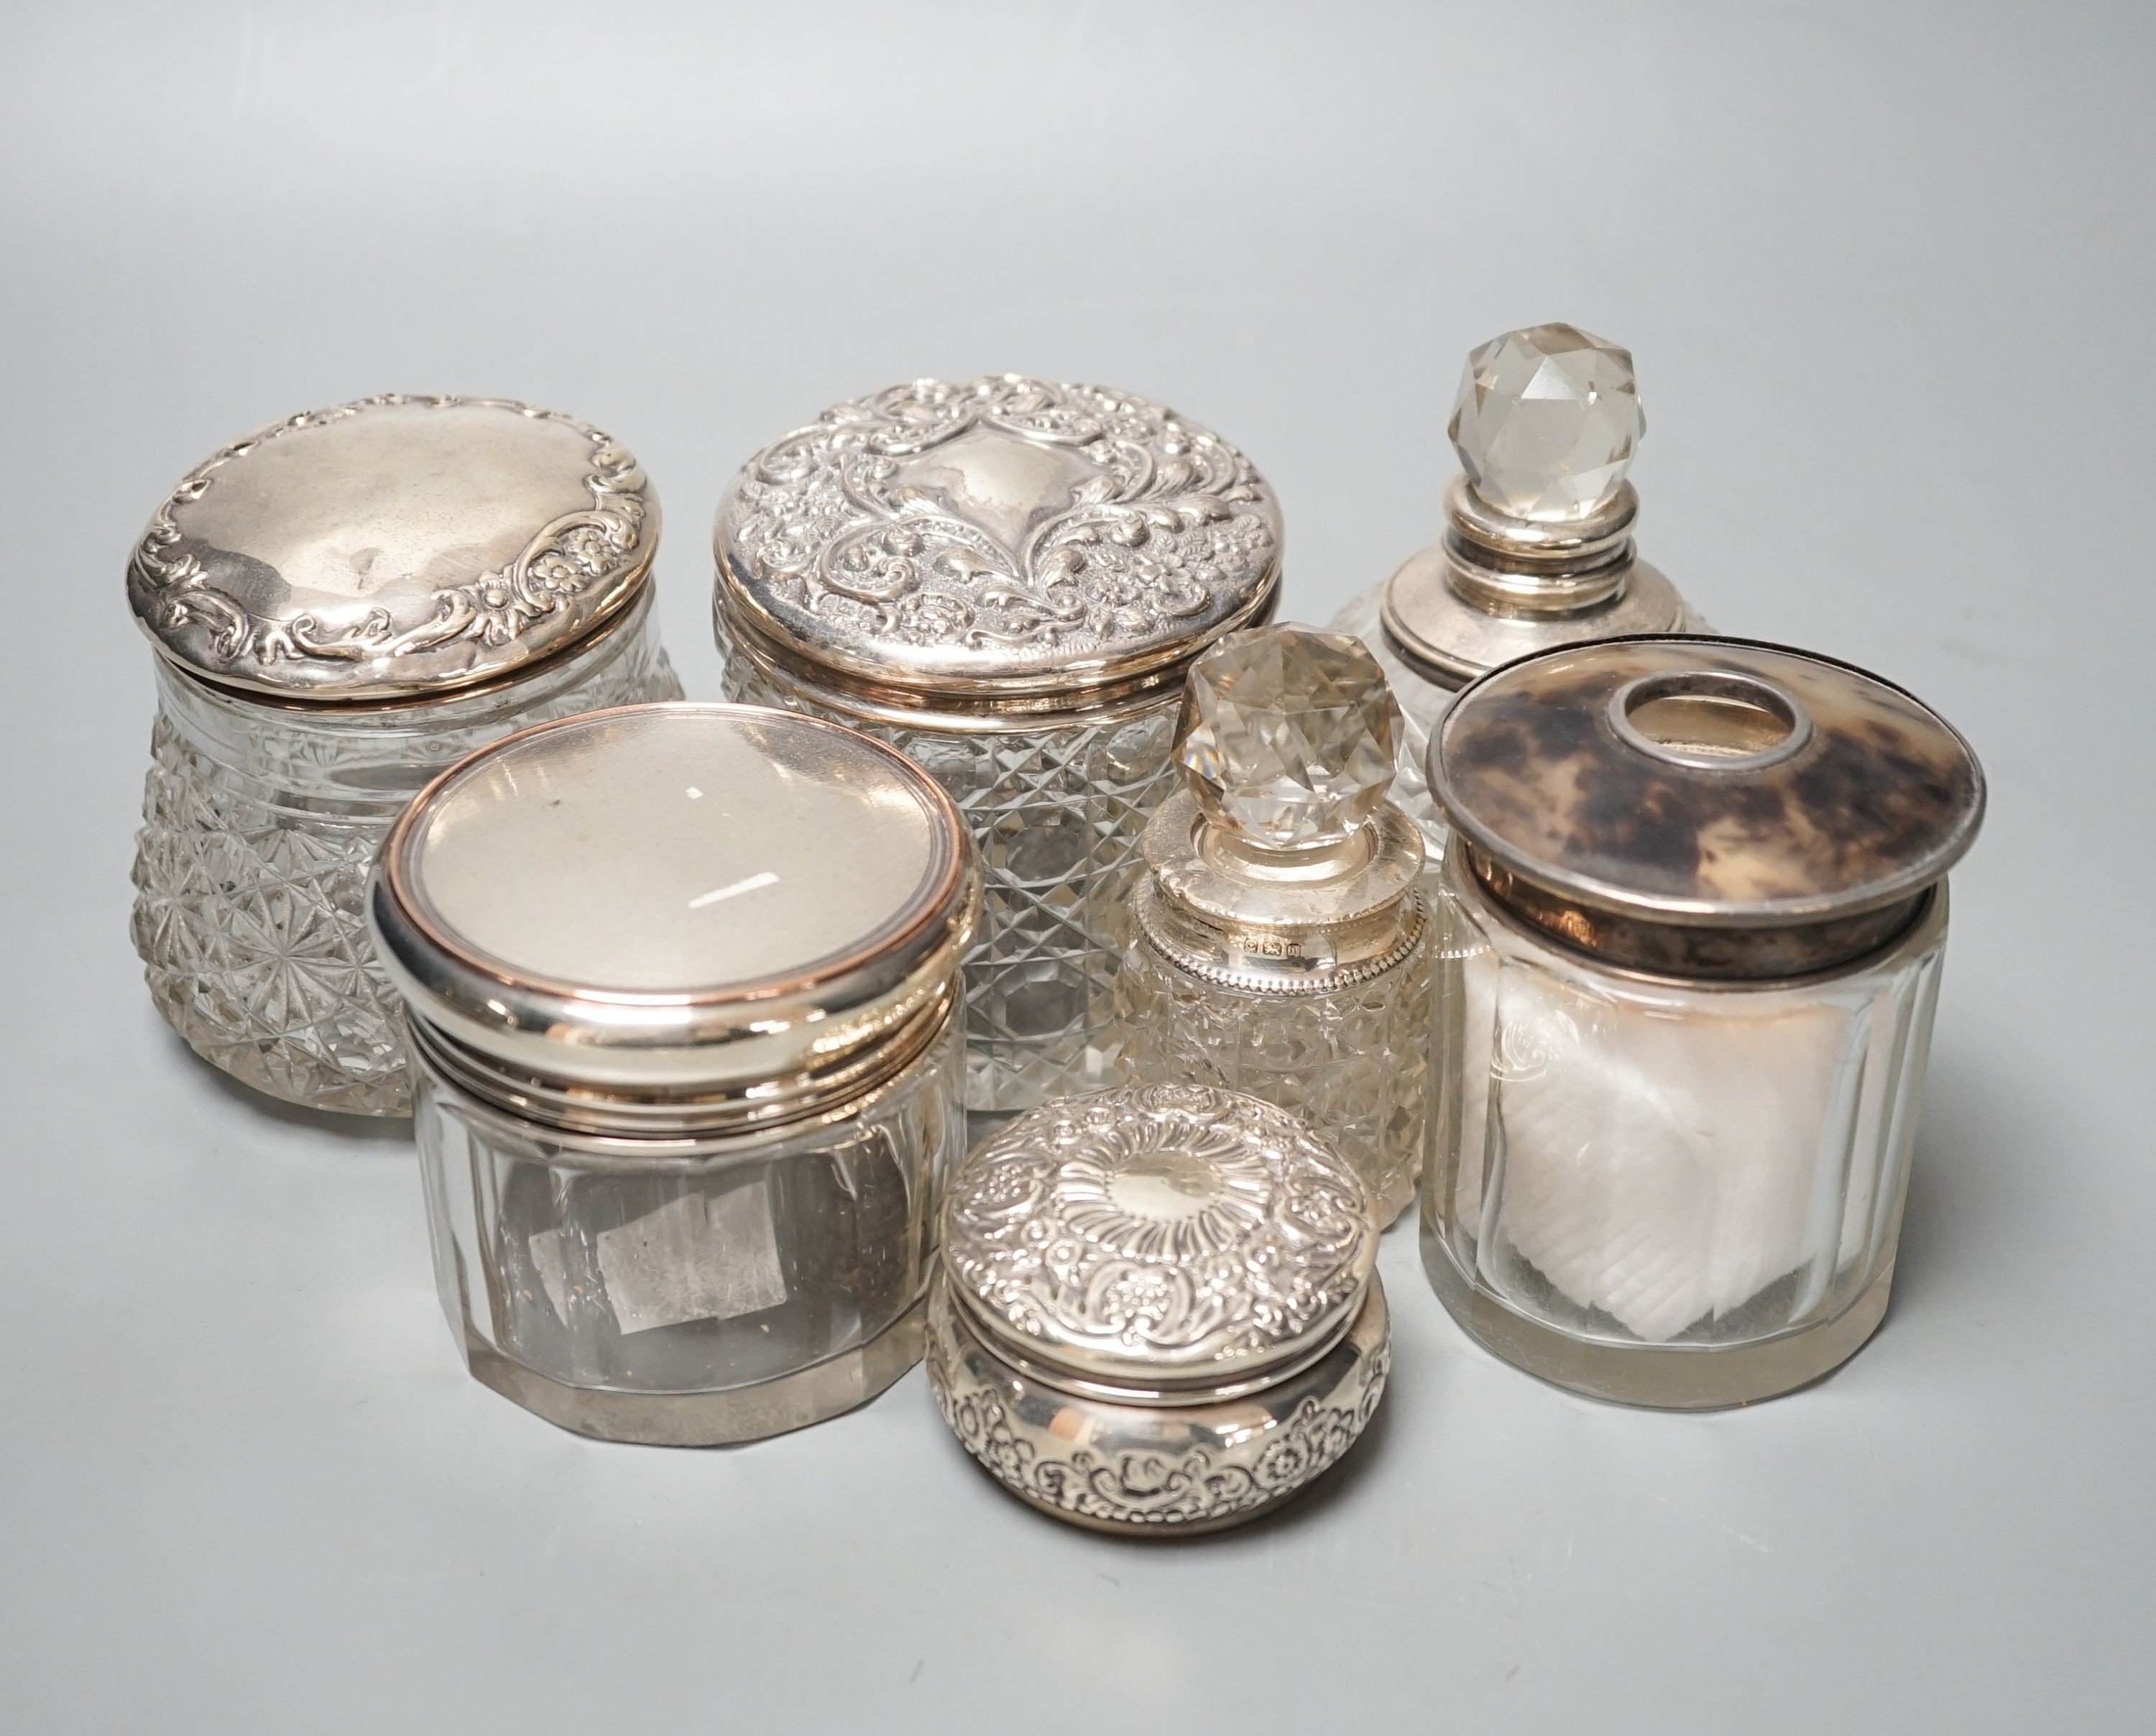 A circular embossed silver box and six silver mounted glass toilet bottles.